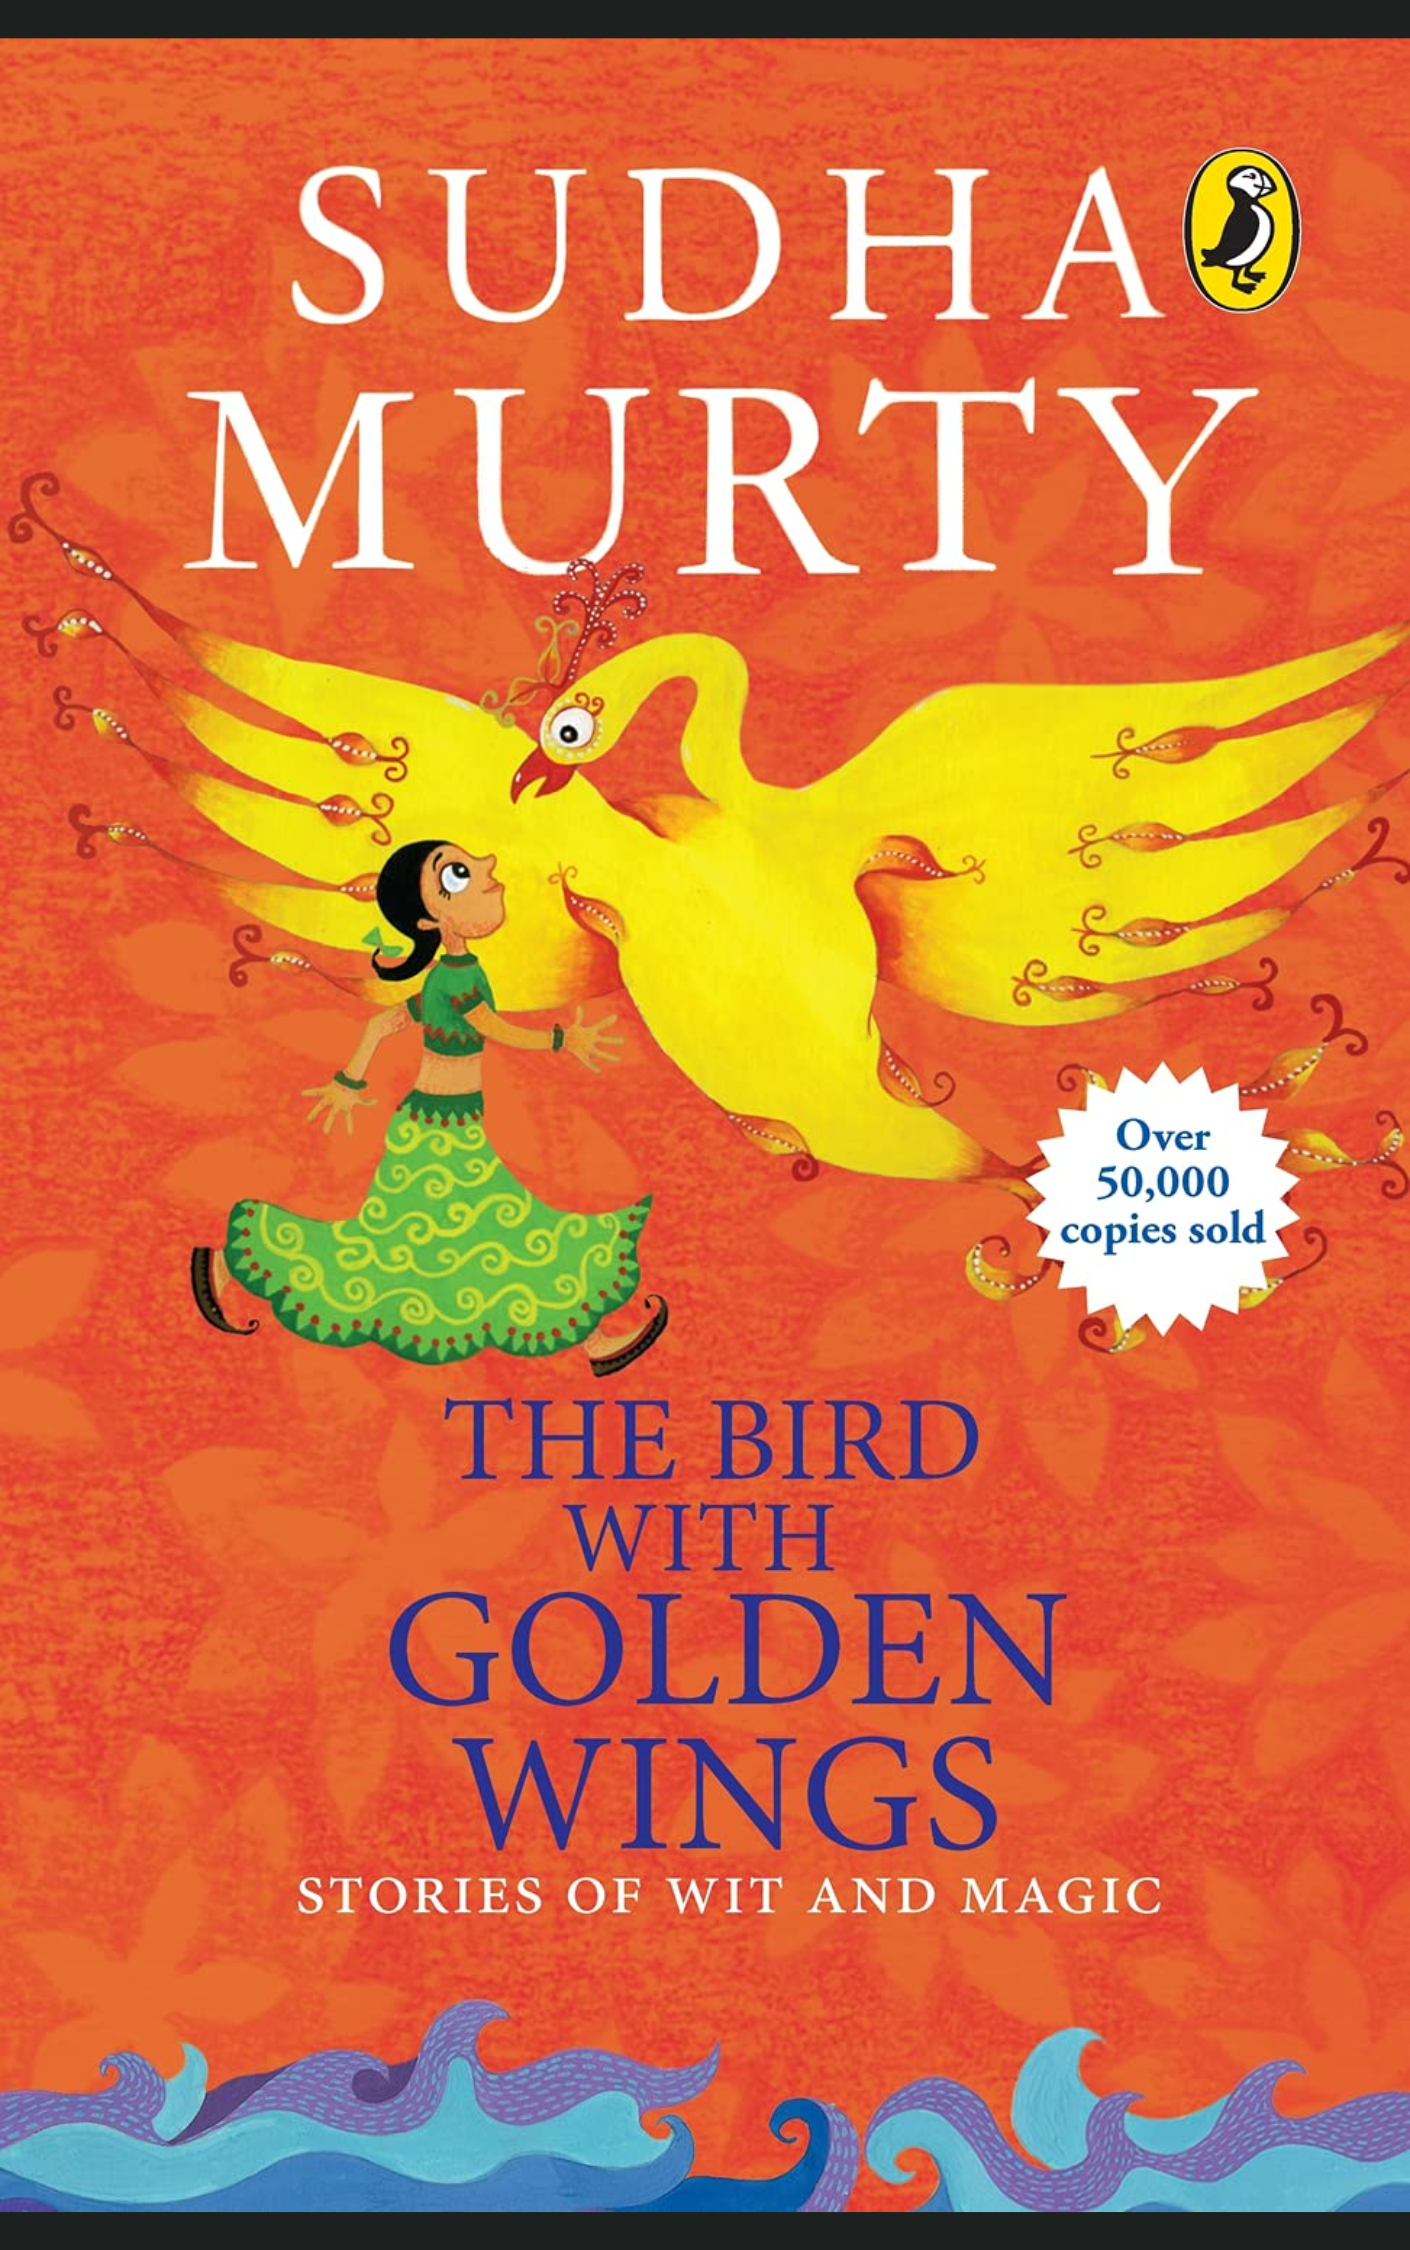 THE BIRD WITH GOLDEN WINGS by SUDHA MURTY